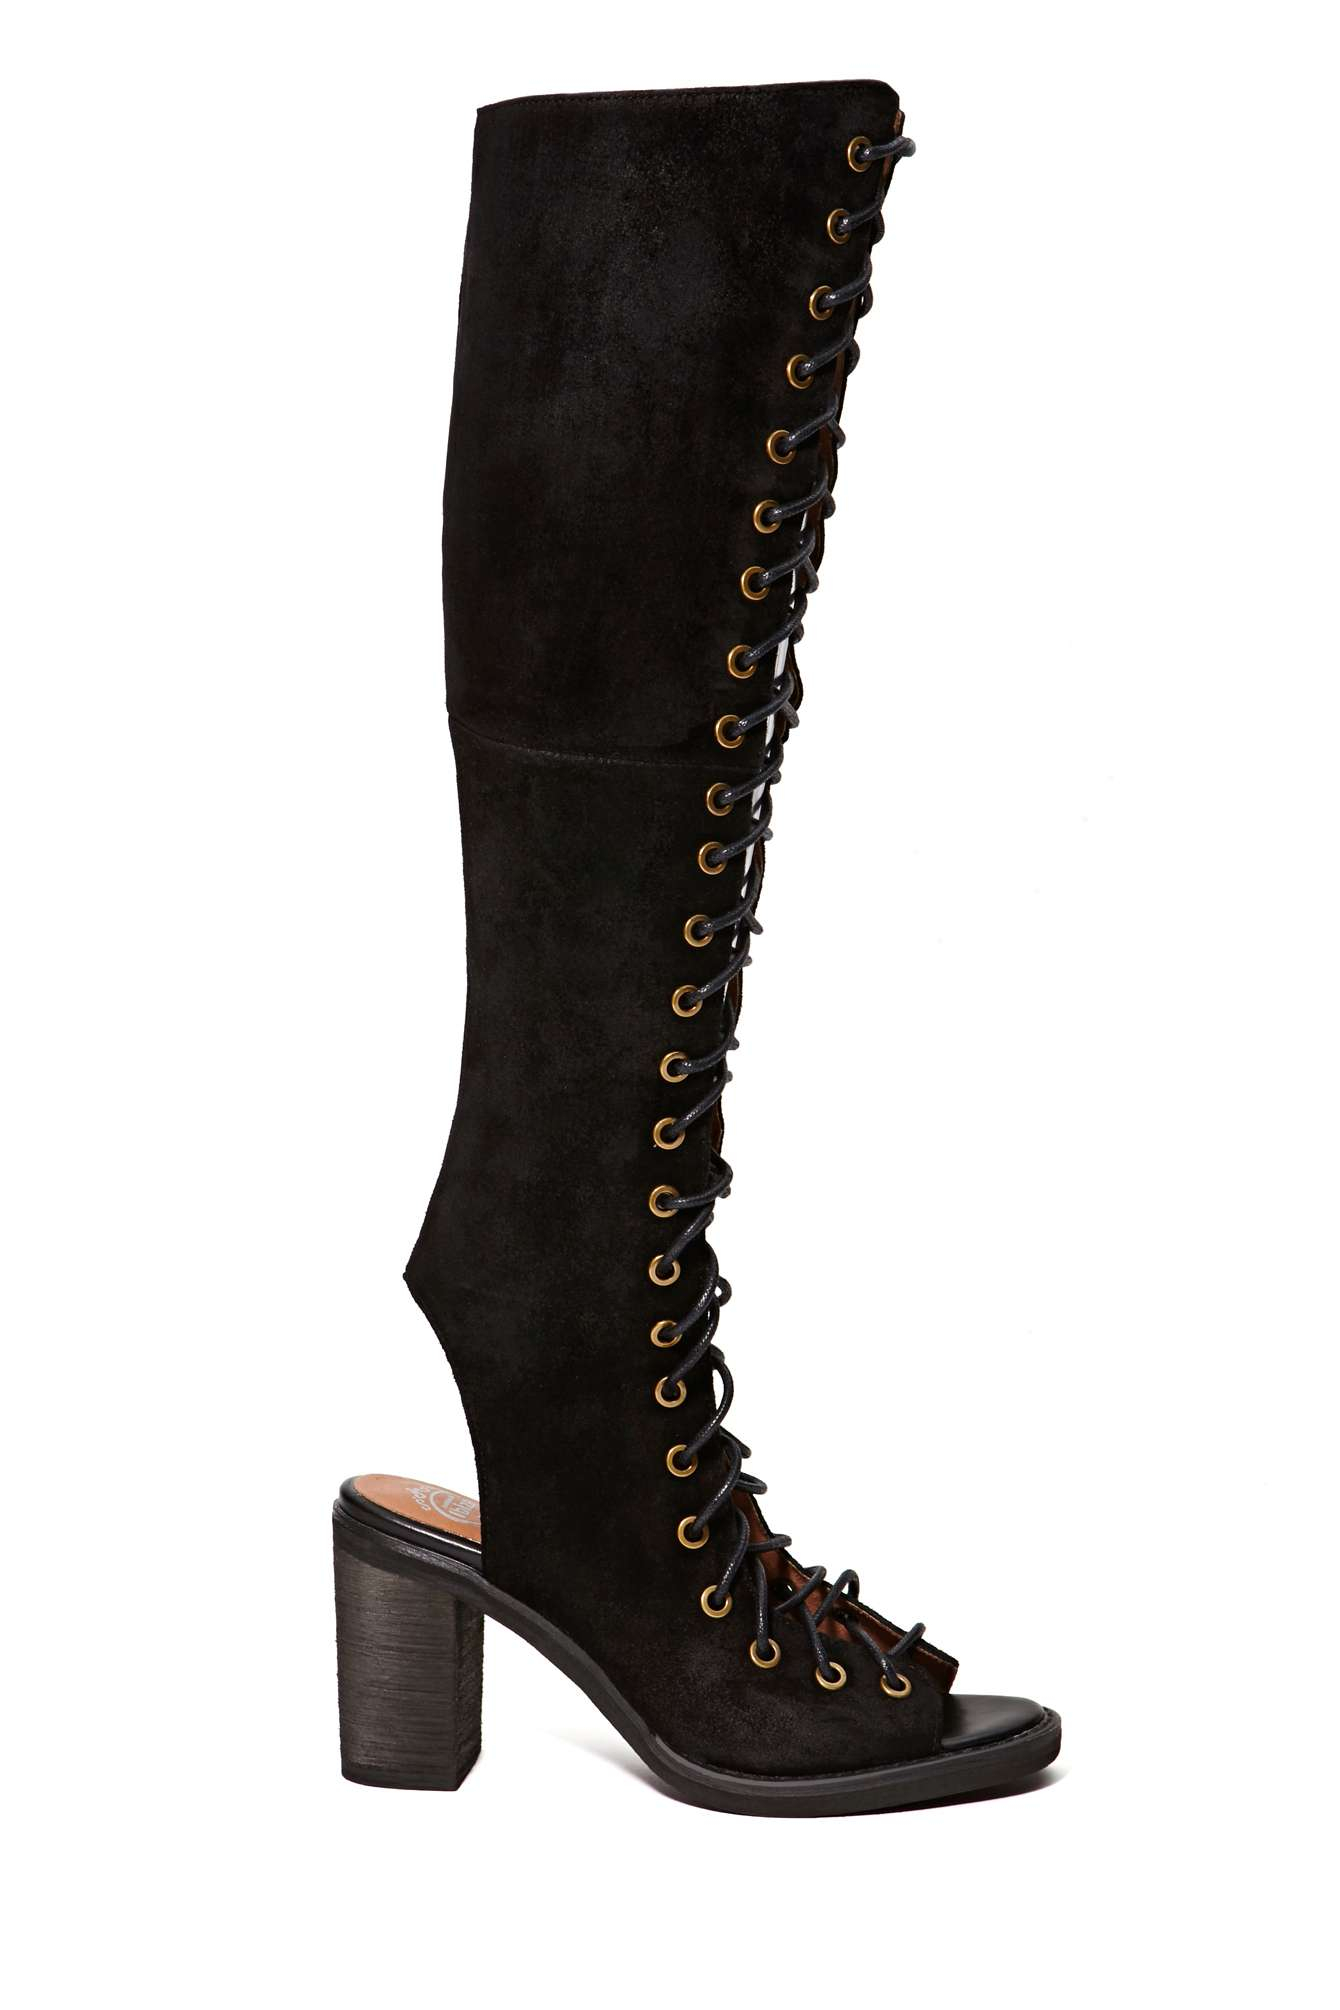 Nasty Gal Jeffrey Campbell Countess Boot - Suede in Black - Lyst